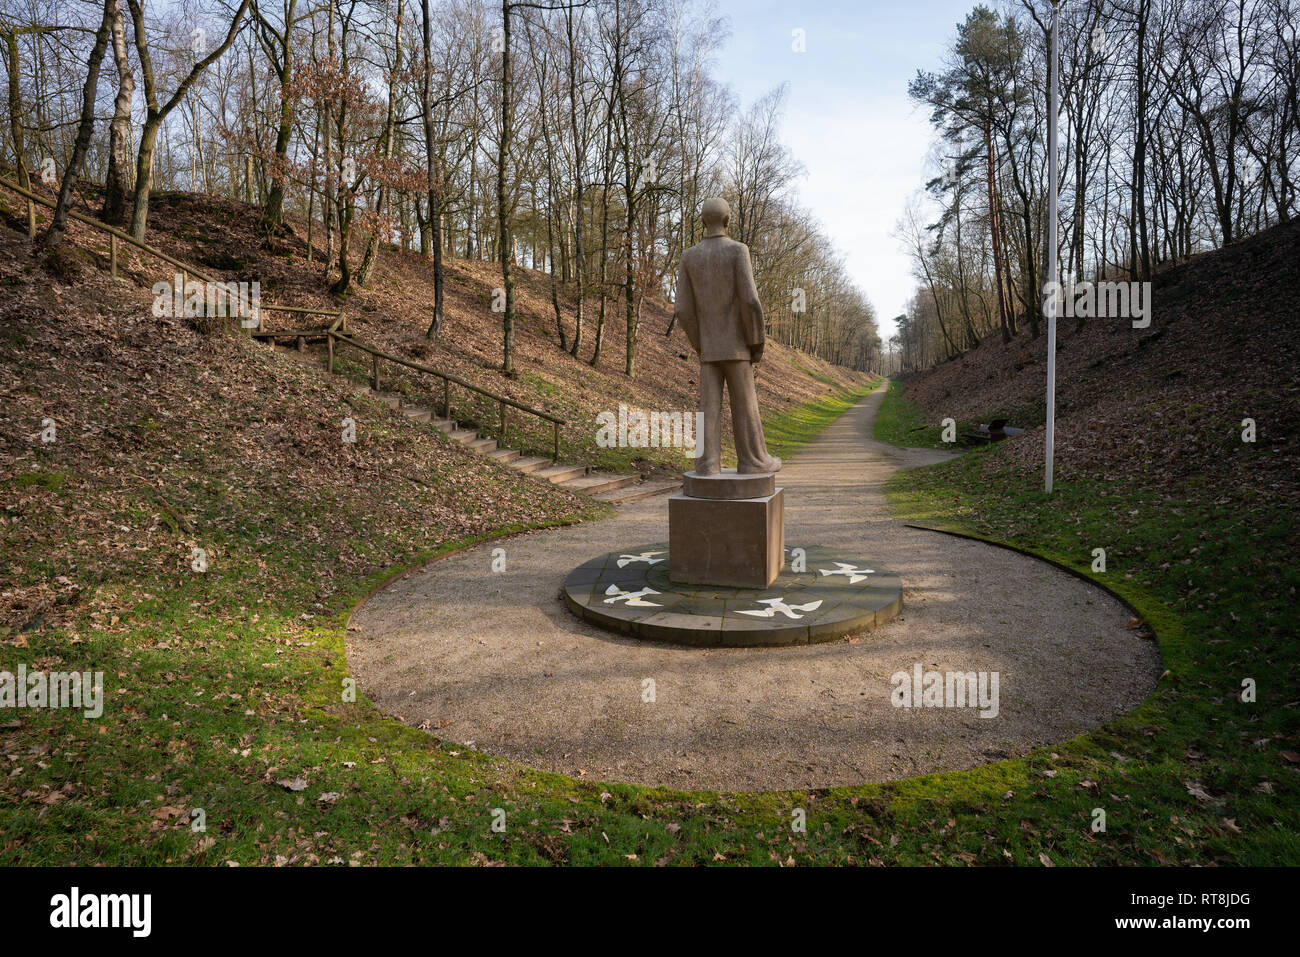 Formal Second World War Concentration camp Amersfoort, the Netherlands Stock Photo